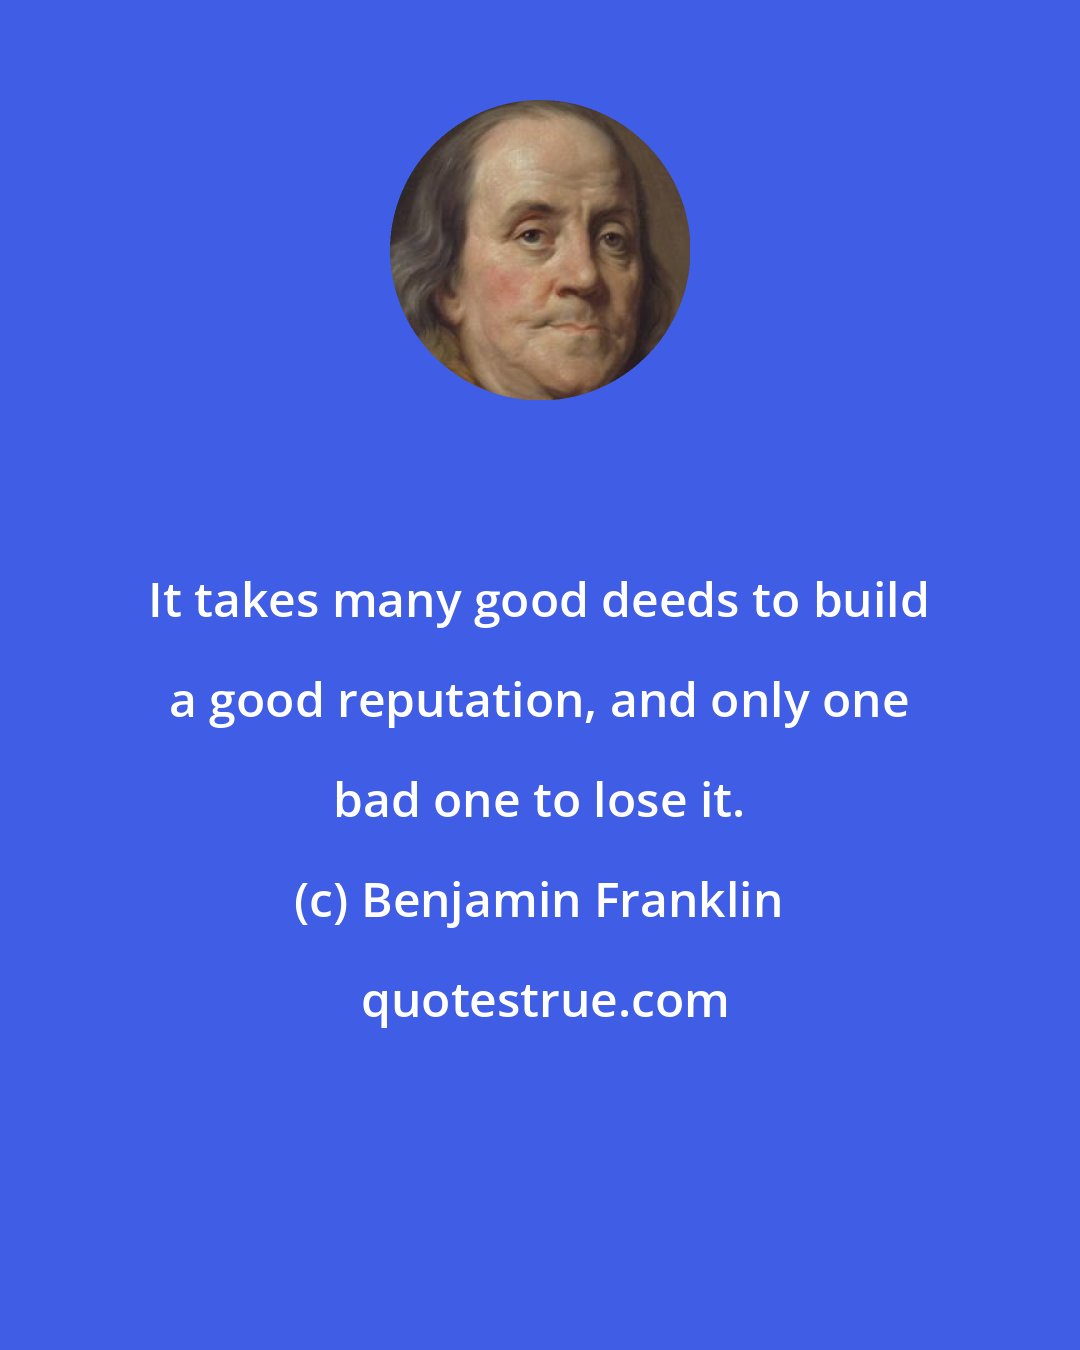 Benjamin Franklin: It takes many good deeds to build a good reputation, and only one bad one to lose it.